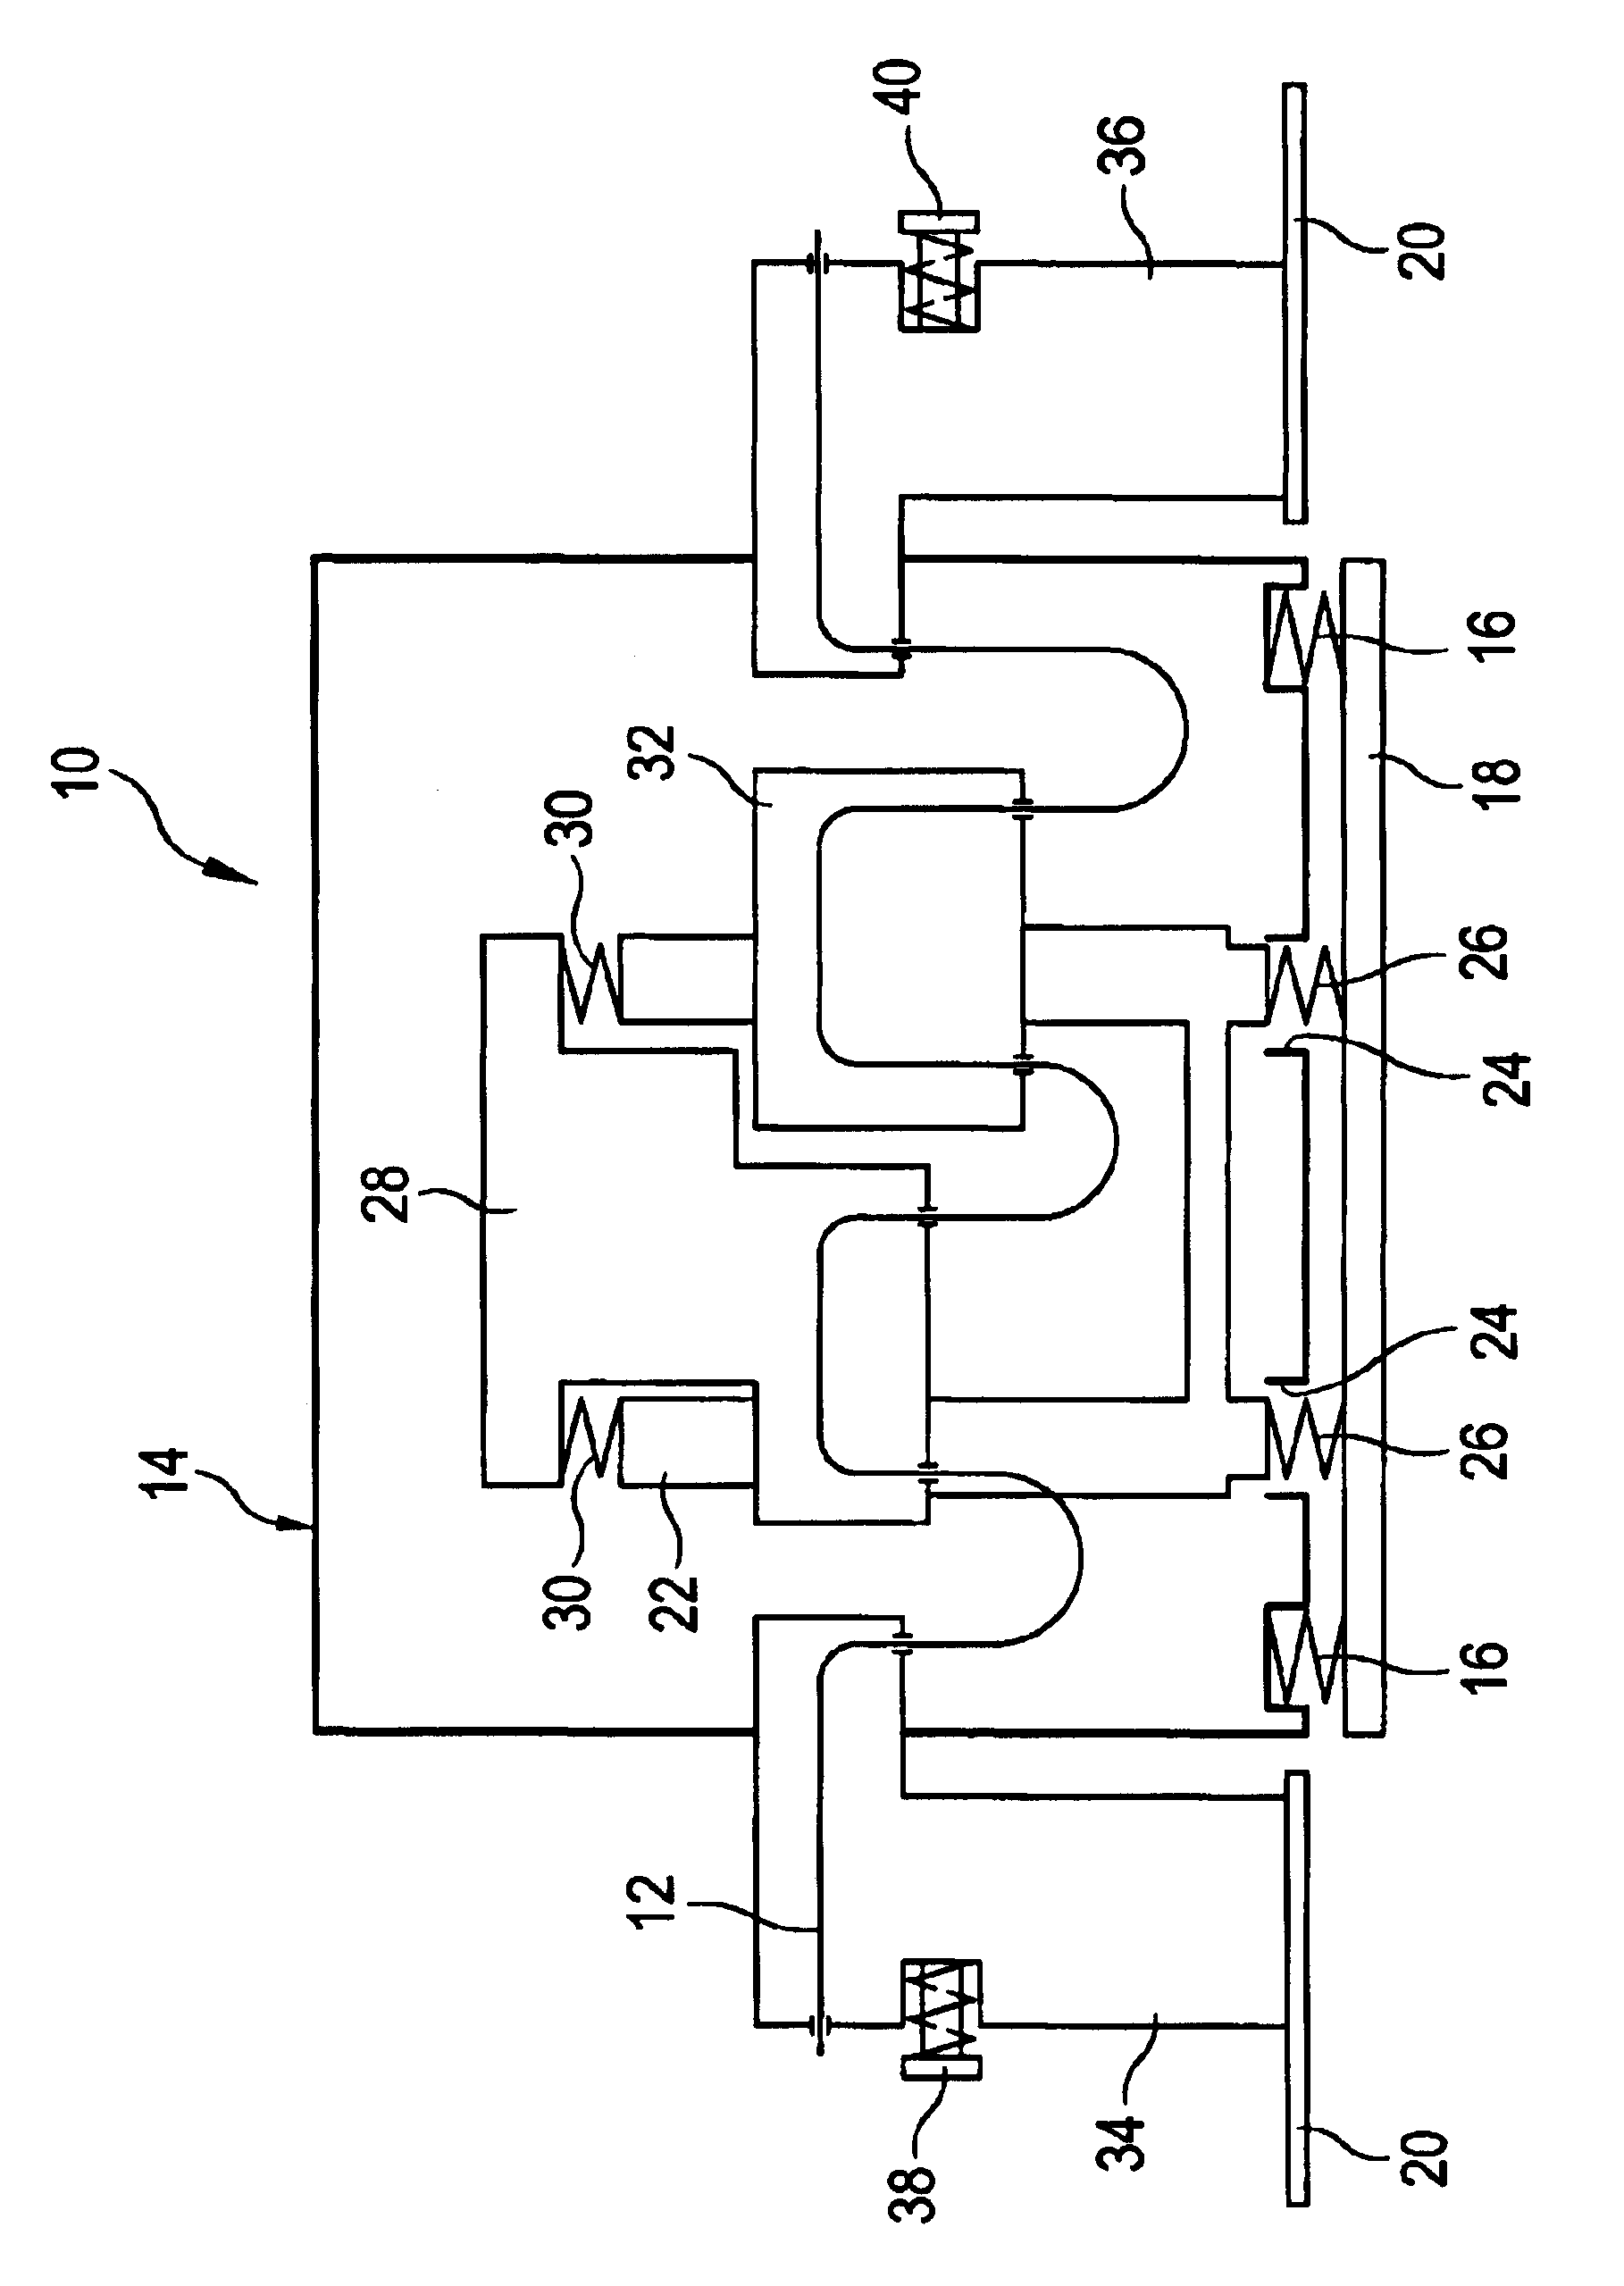 Apparatus for processing photographic materials